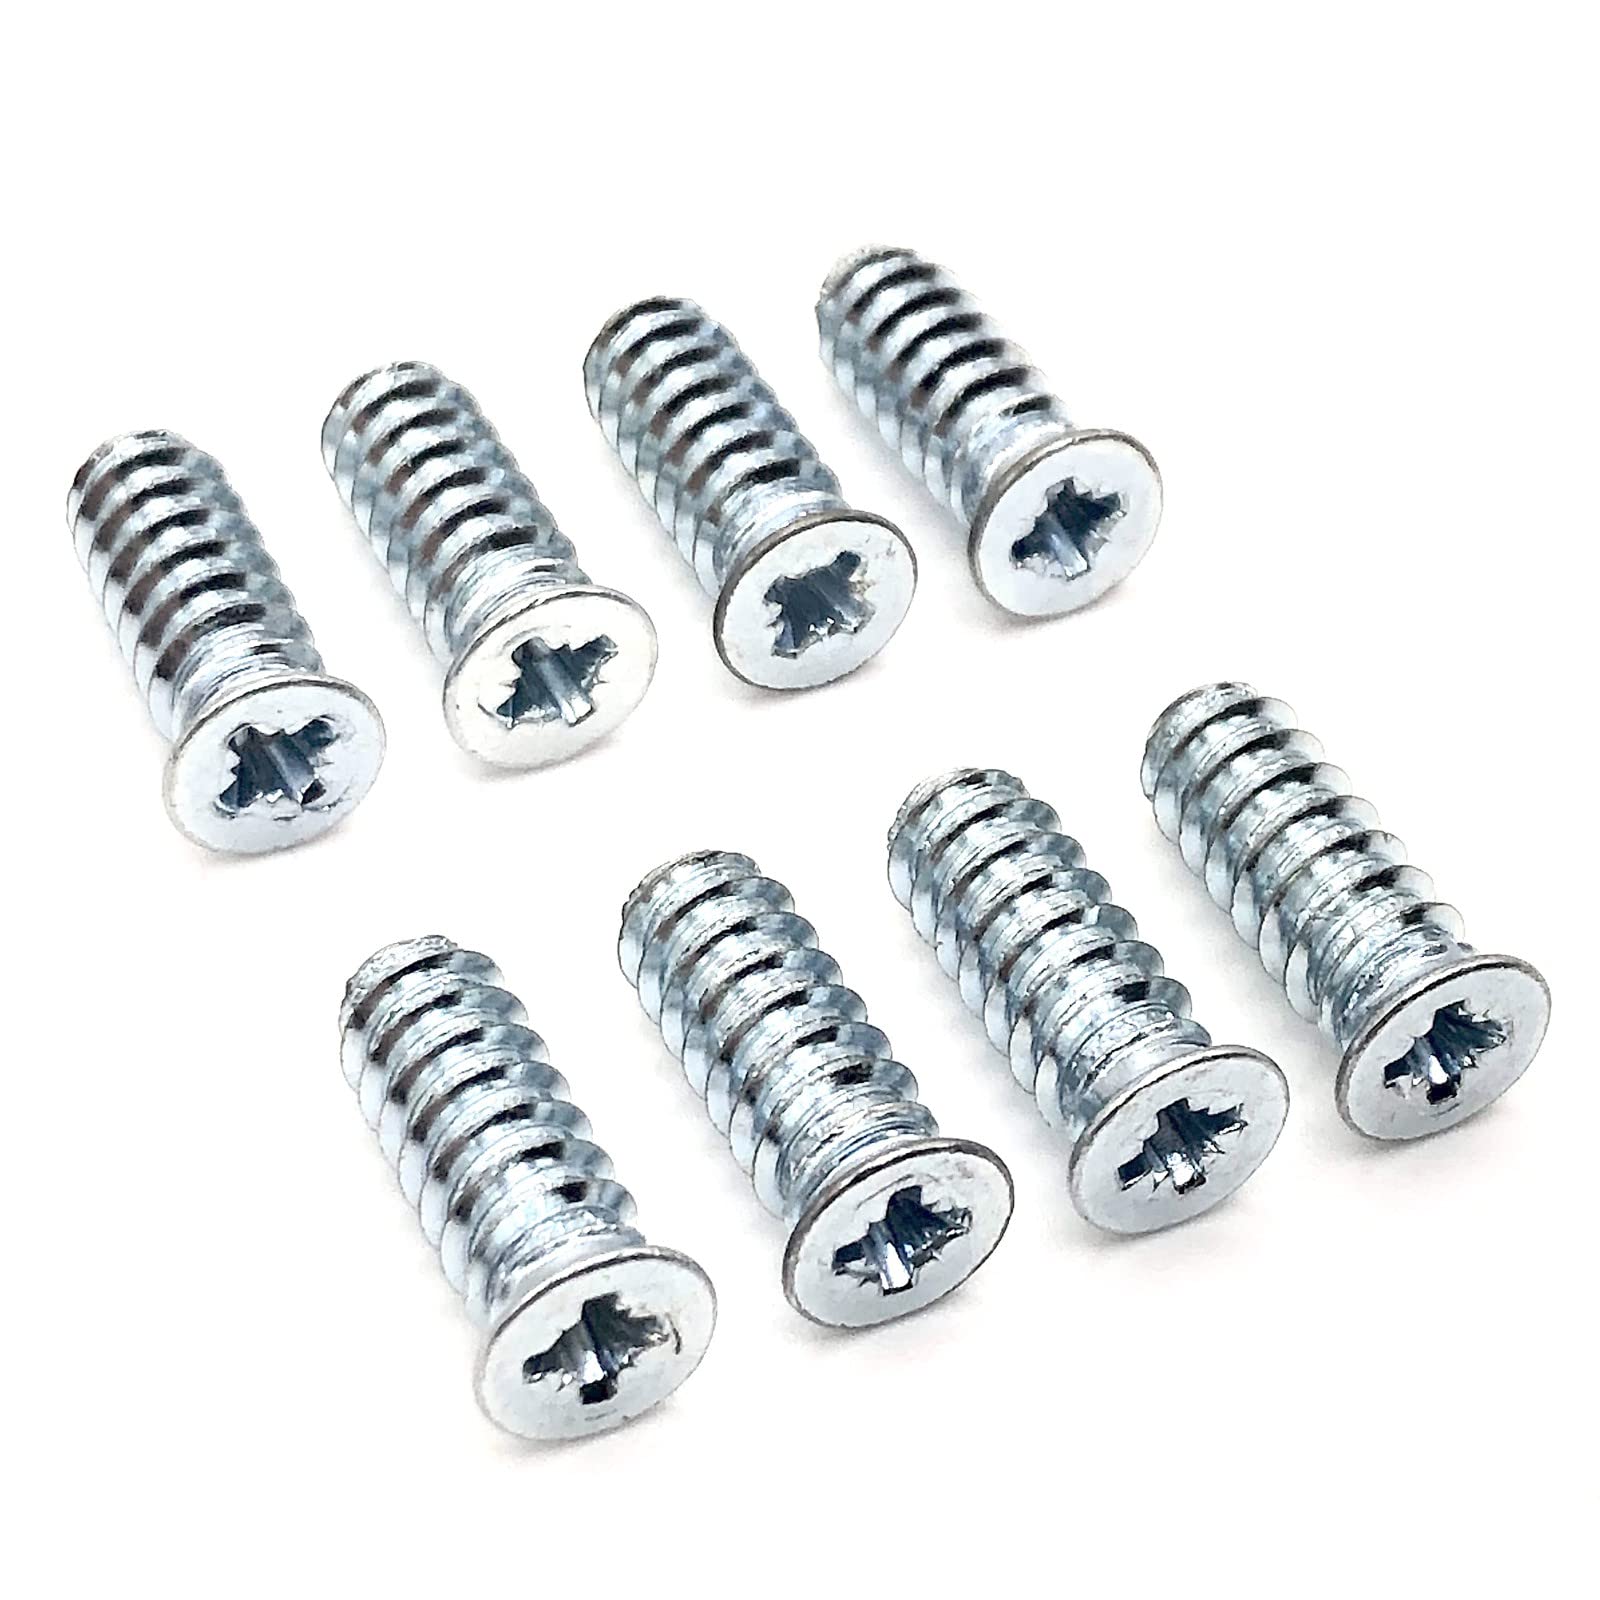 ReplacementScrews Flat Head Euro Screws Compatible with IKEA Part 100372 (Pack of 8)